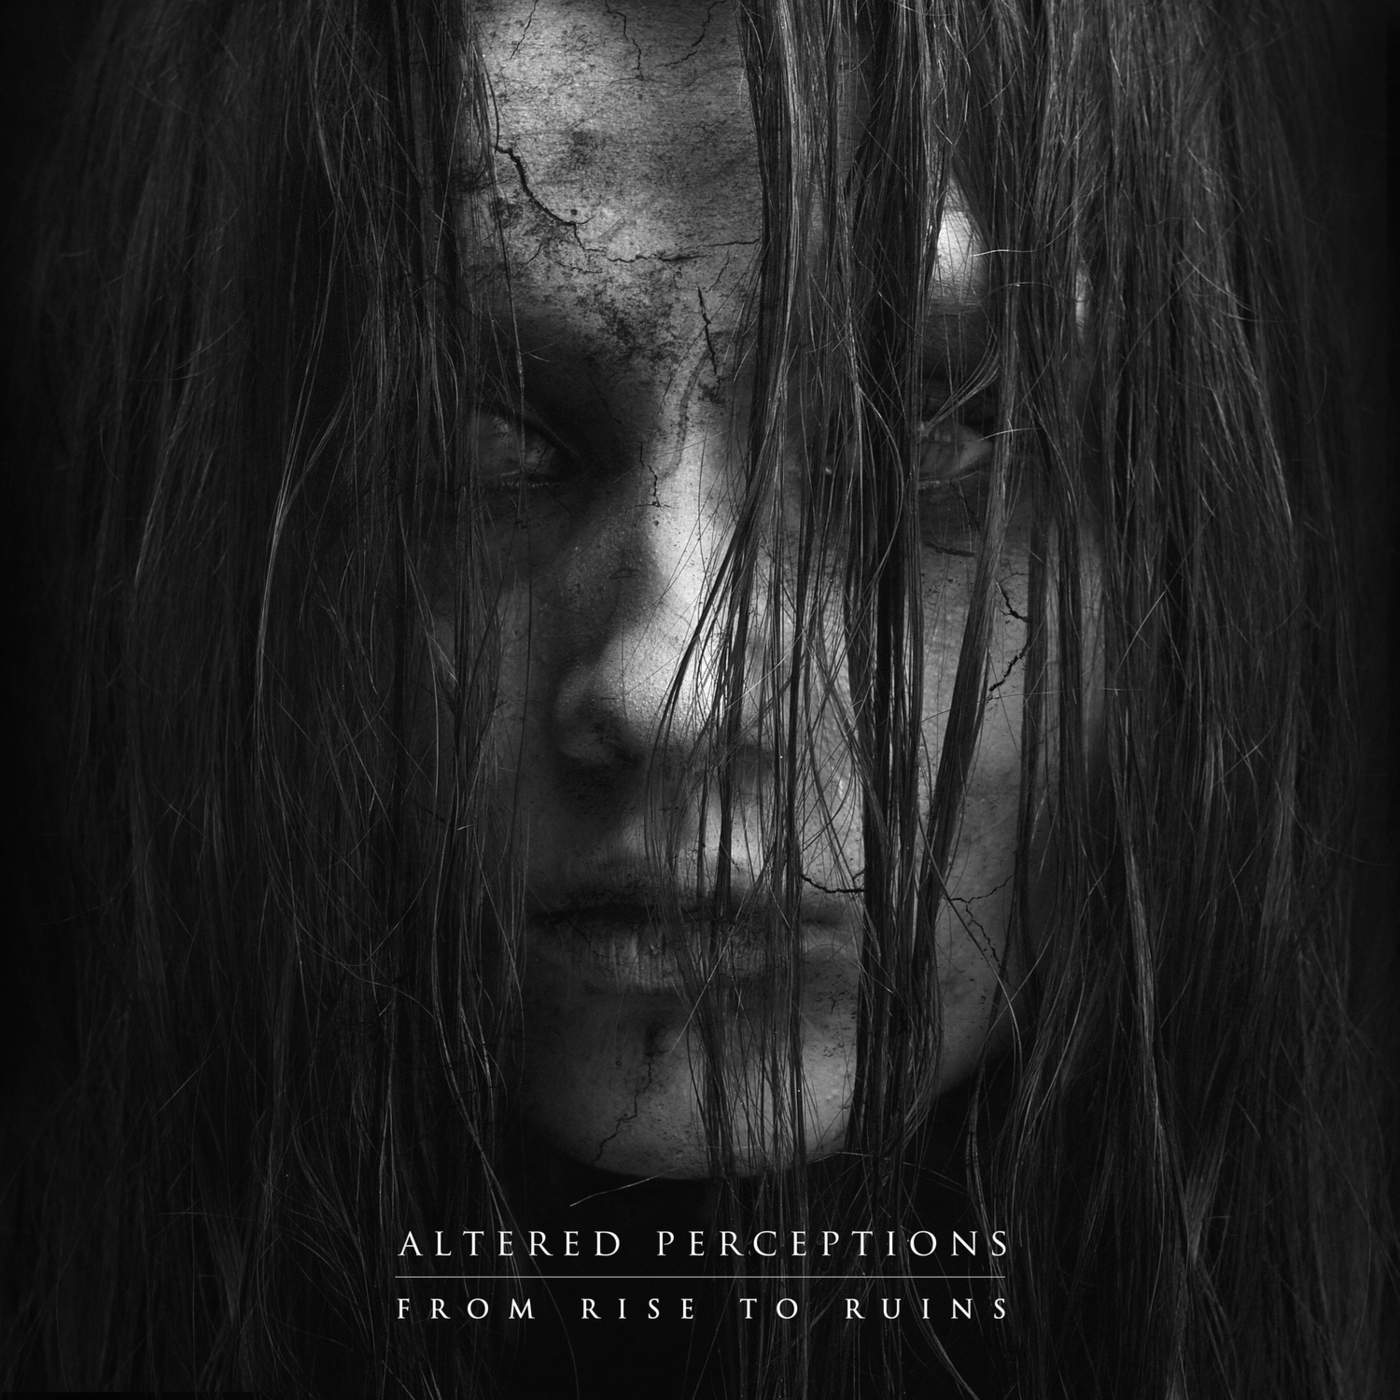 Altered Perceptions - From Rise to Ruins (2016) Album Info